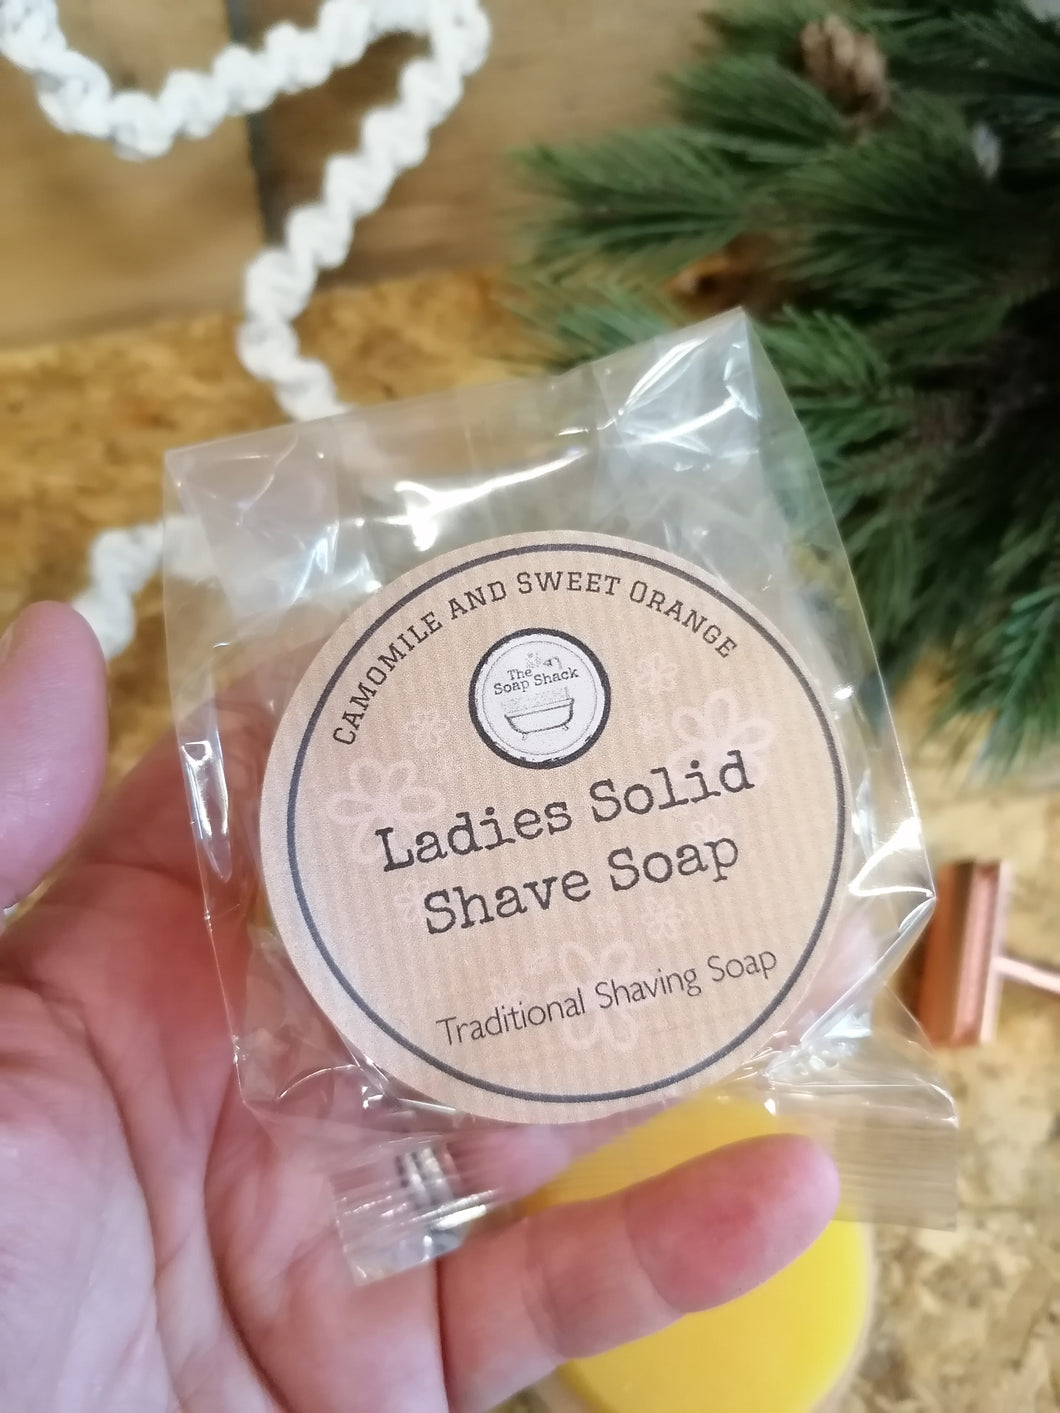 Ladies Shave Soap - with Chamomile and Sweet Orange